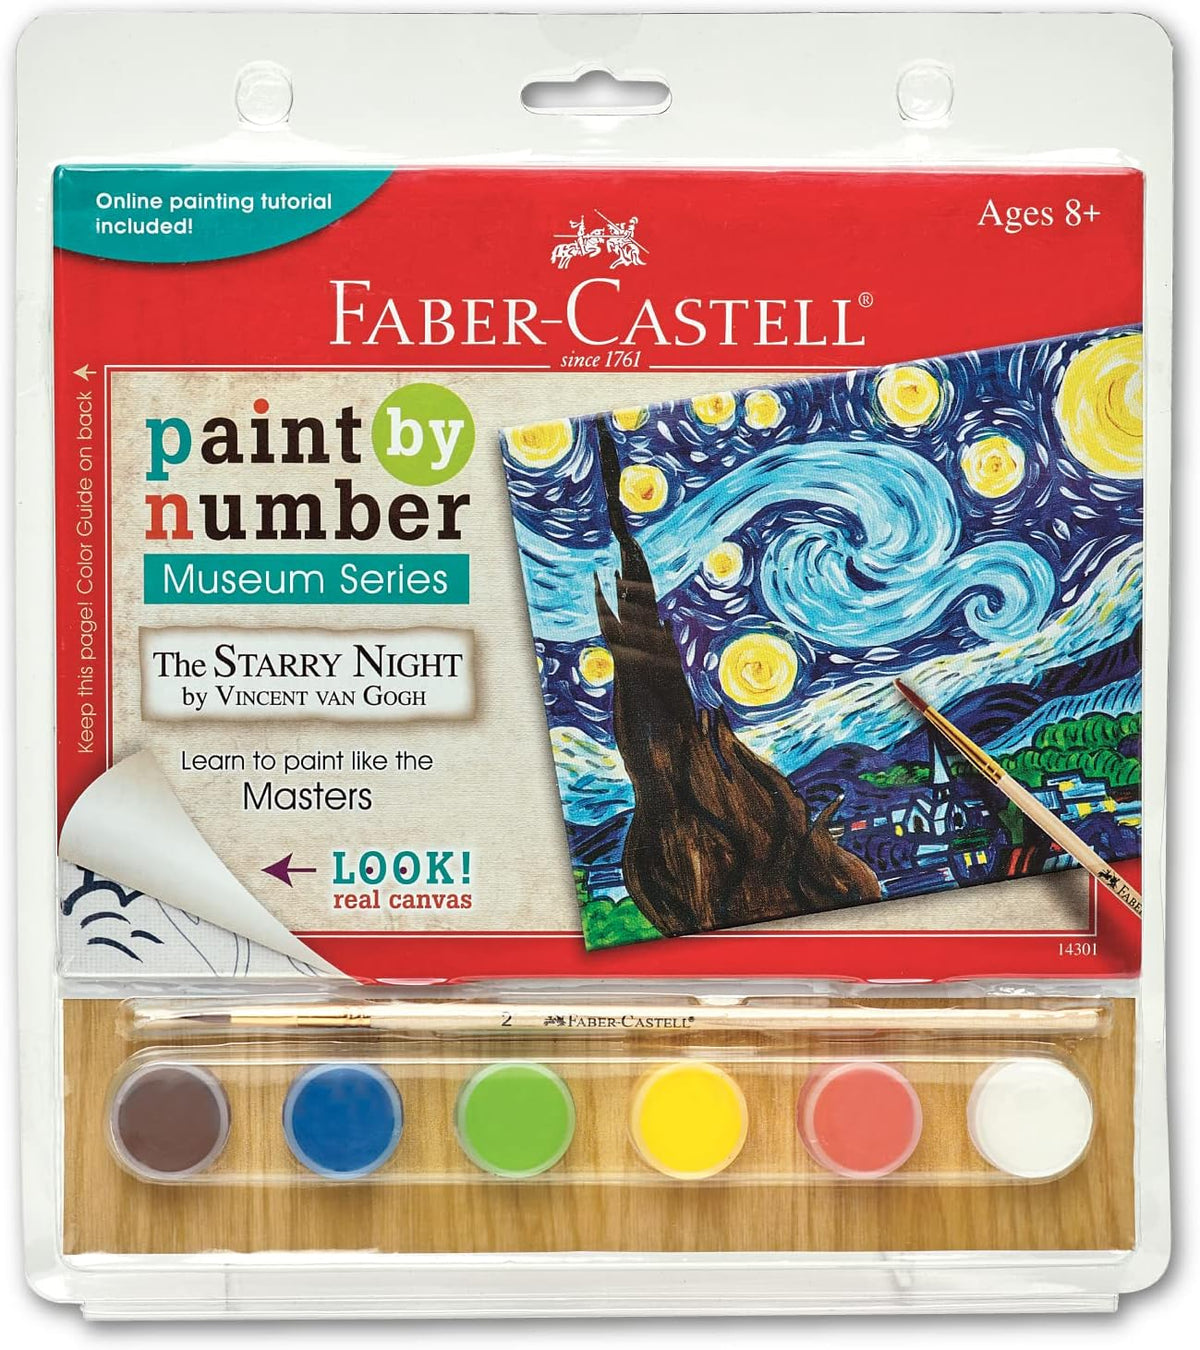 Paint by Number Museum Series The Starry Night